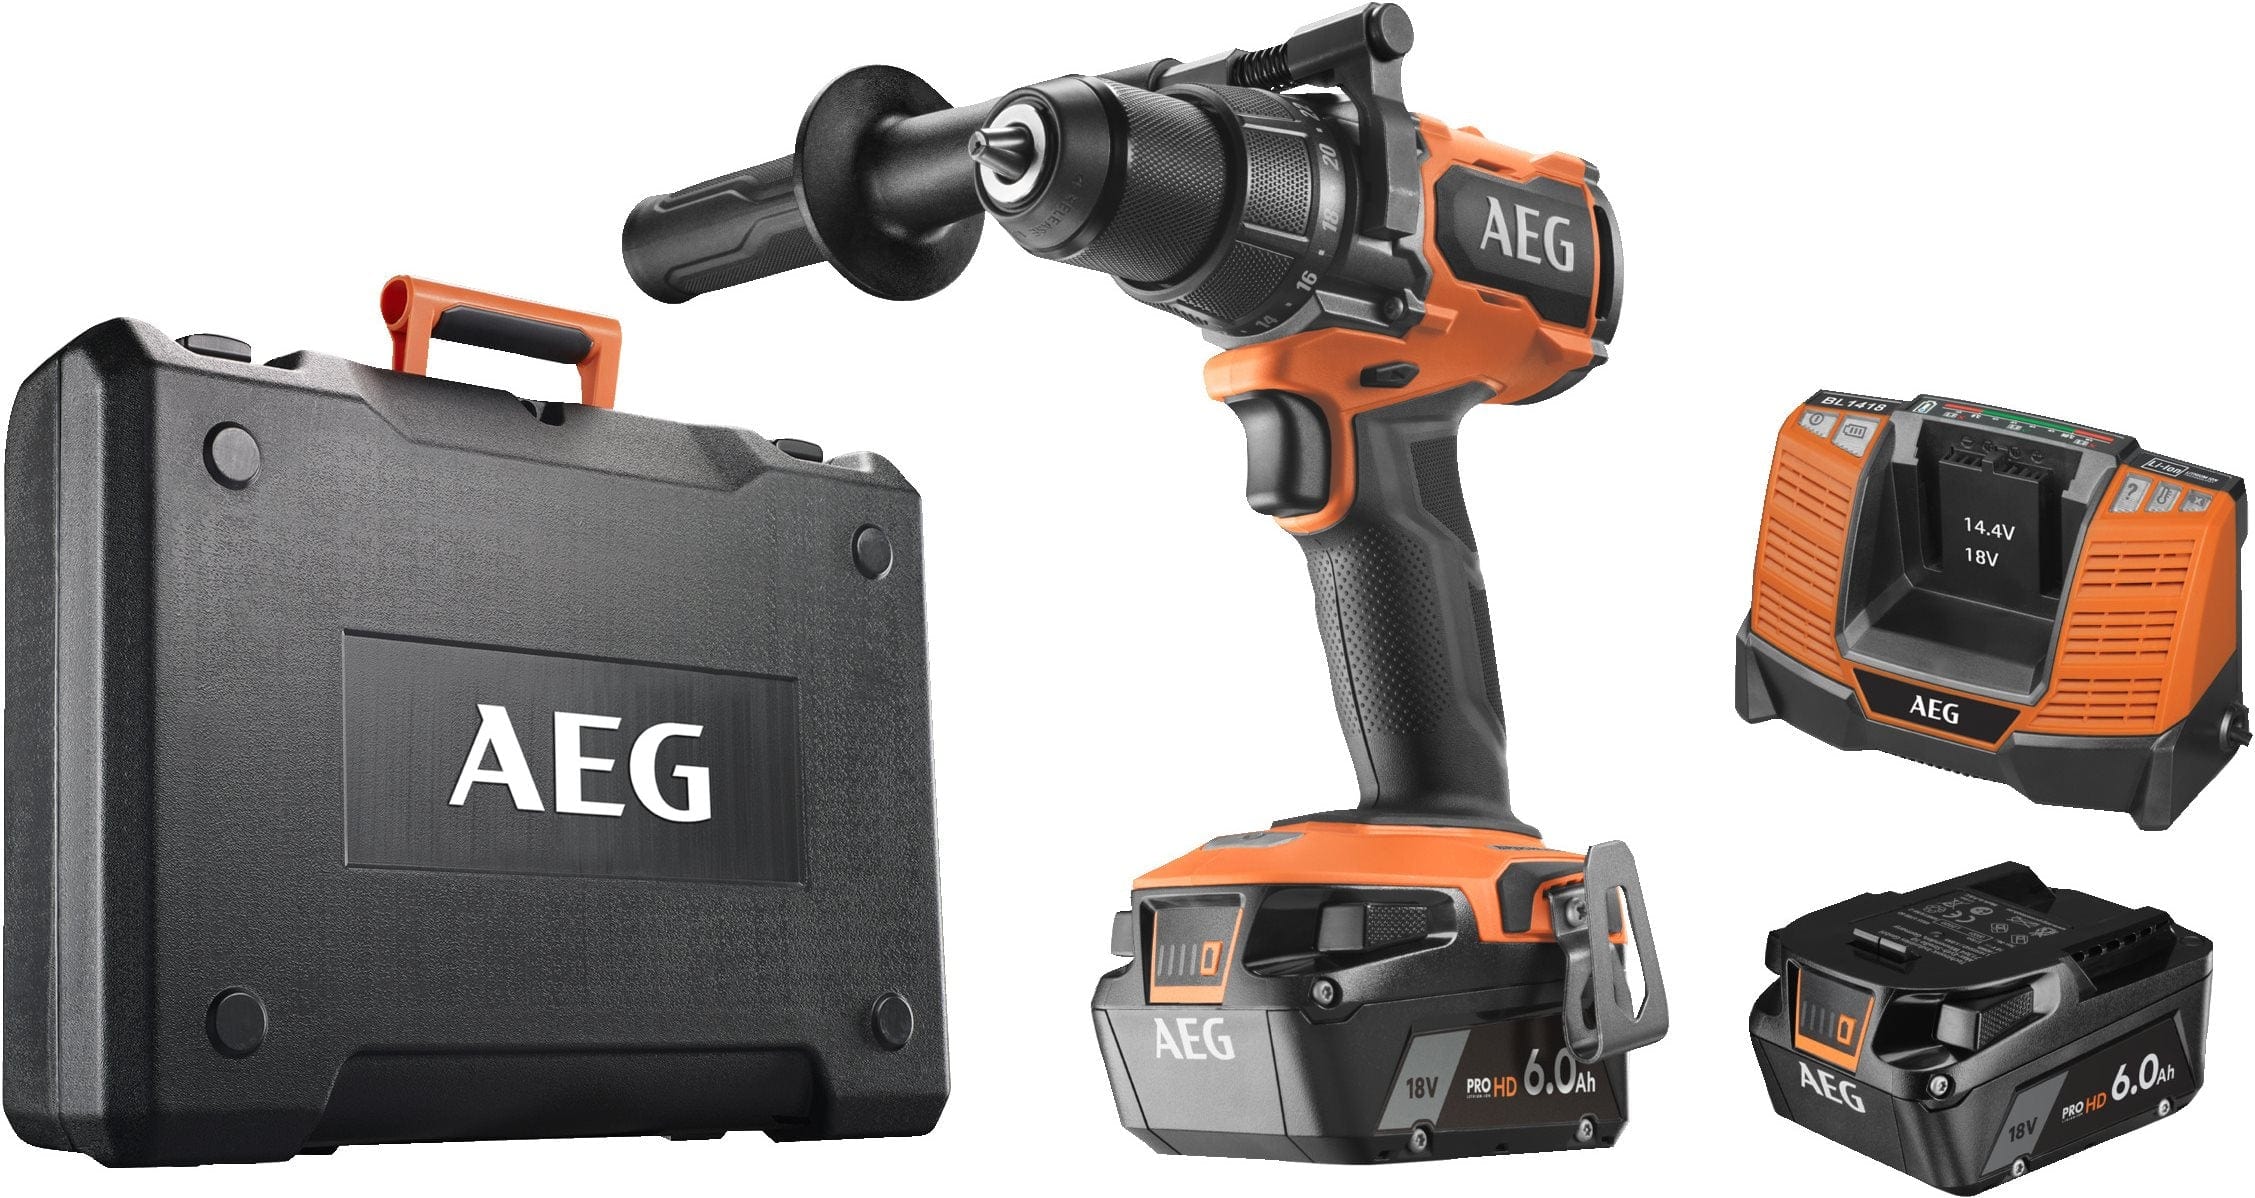 AEG Lithium-Ion Cordless Impact Hammer Drill 18V - BSB18CLI-202C | Supply Master Accra, Ghana Drill Buy Tools hardware Building materials